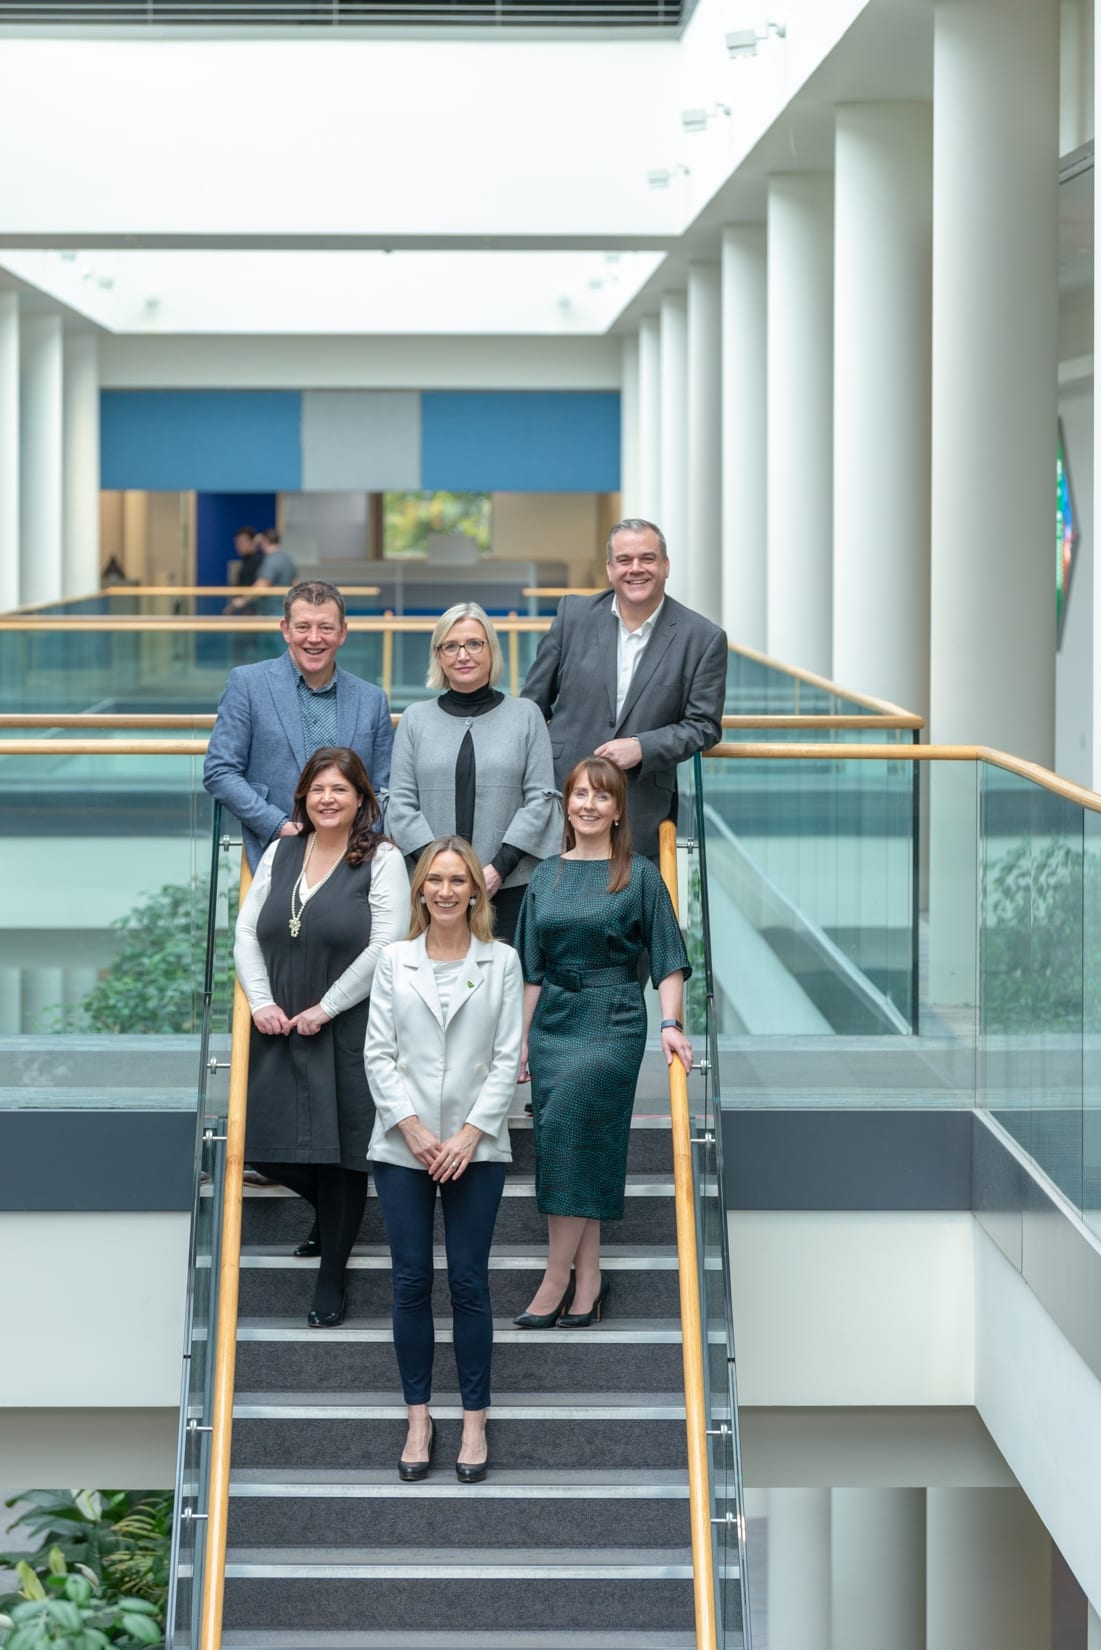 No repro fee- Building your Employer Value Proposition event held in Analog Devices in association with Limerick Chamber on Wednesday 22nd January 2020  - From Left to Right: Back Row: Graham Burns - CPL, Judy Tighe - Speaker / AIB, Noel Gavin - Speaker / Northern Trust.  Front Row: Jemma Carty - Speaker / DELL Technologies, Dee Ryan - CEO Limerick Chamber,  Fiona Keogh - Speaker / Analog Devices International, 
Photo credit Shauna Kennedy